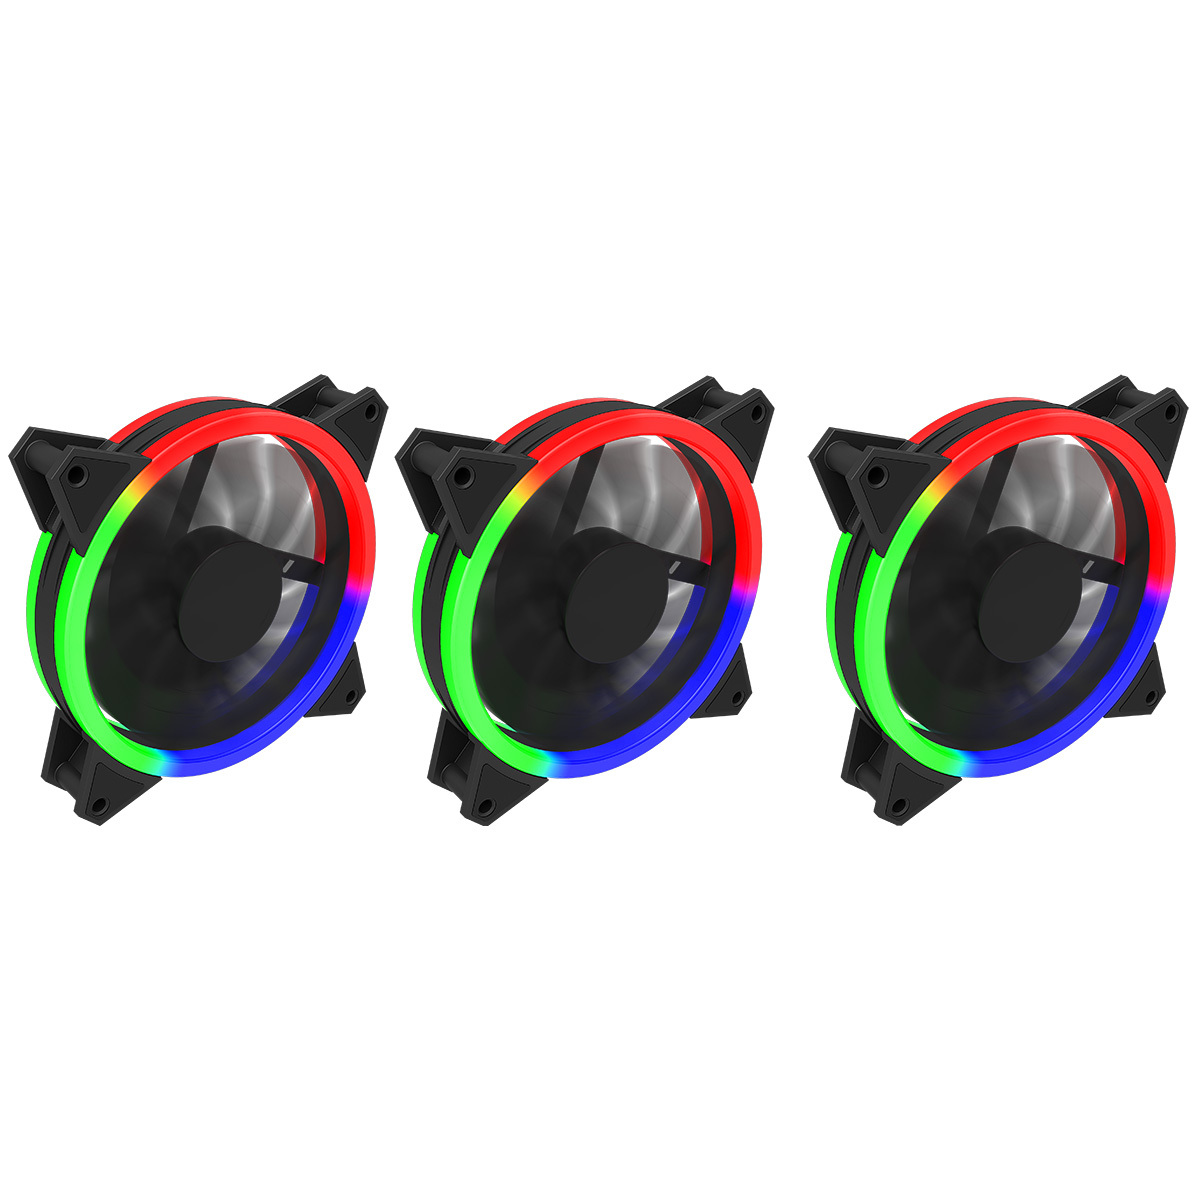 LEDdess Wireless RF Control RGB LED 120mm Case Fan for PC Cases, CPU  Coolers, Radiators System (6pcs RGB Fans, RF Remote Controller, A Series) :  Amazon.in: Computers & Accessories